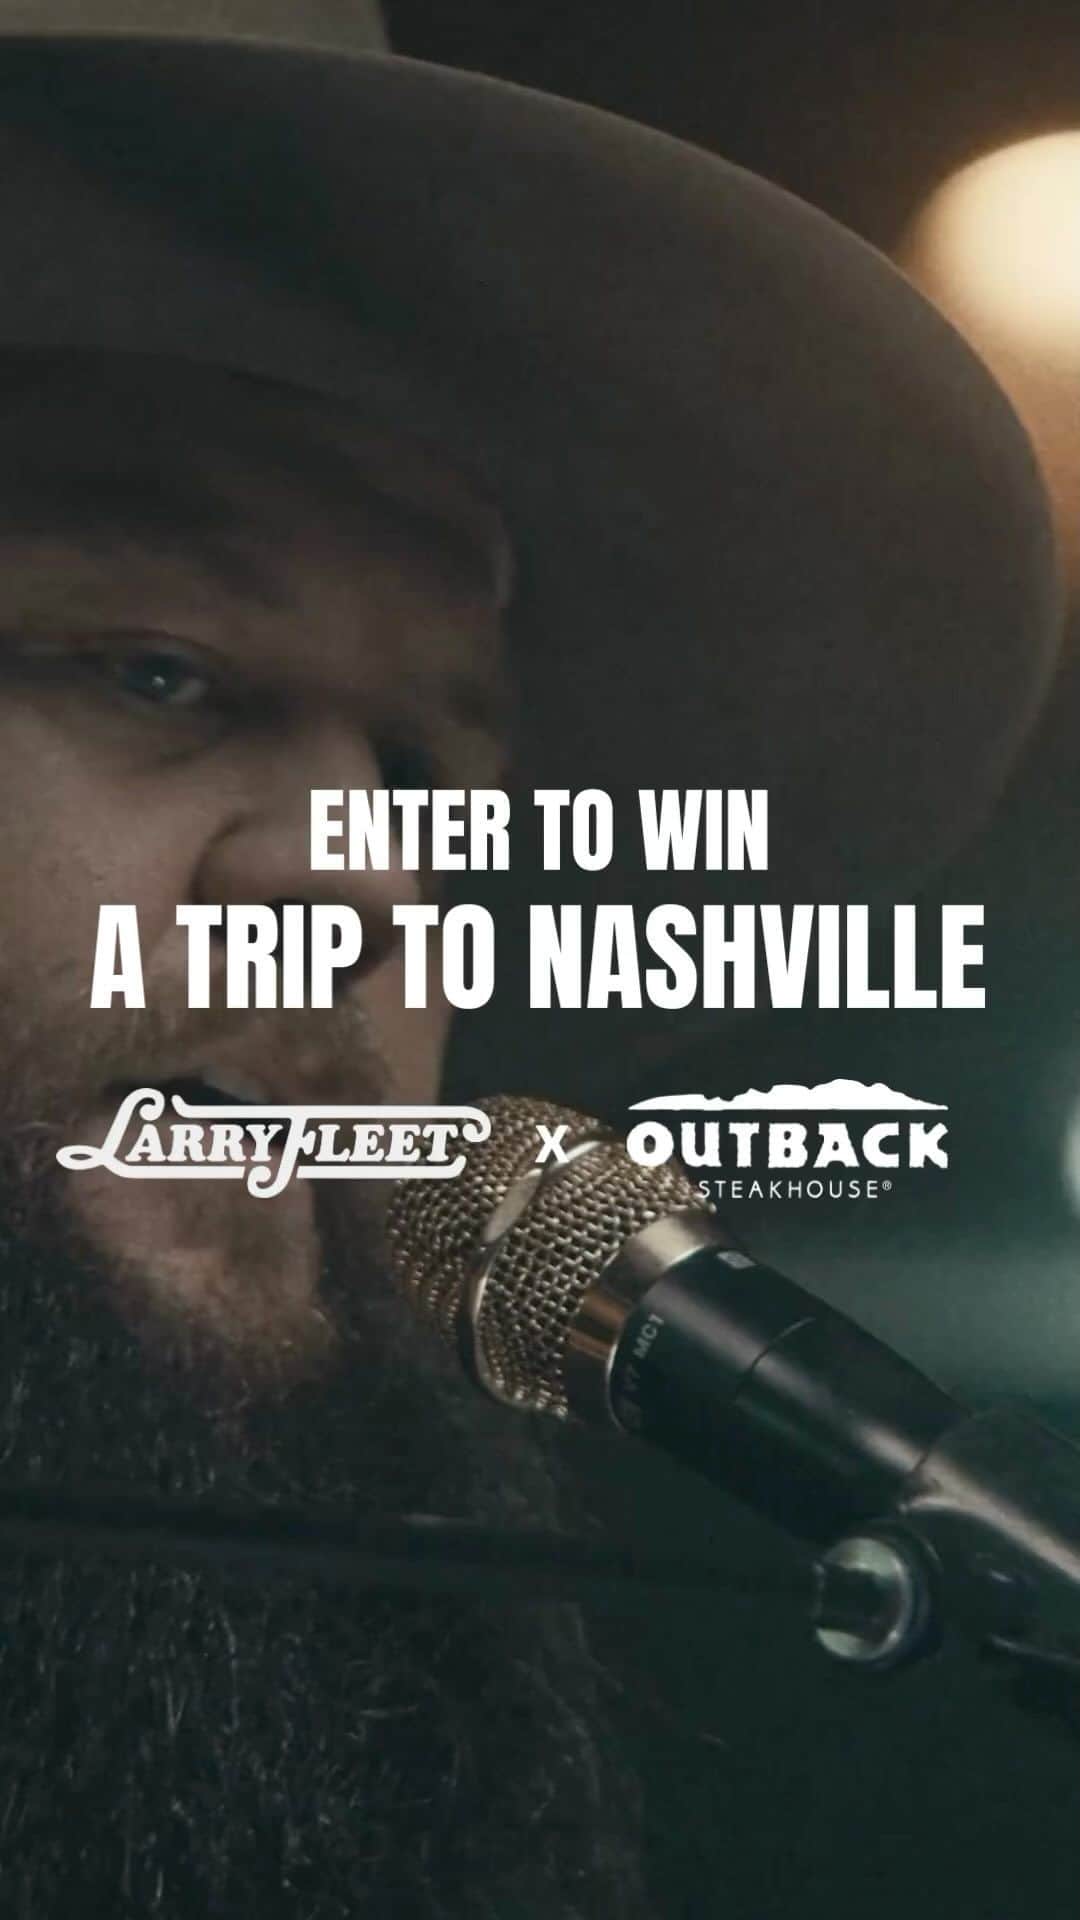 Outback Steakhouseのインスタグラム：「🚨 Win a trip for you and your mate to see the sold out @LarryFleet concert at the historic Ryman Auditorium in Nashville on September 22. Enter the sweepstakes exclusively through the Outback app now thru 9/15.​  ✔️Download the Outback app​ ✔️Make sure your notifications are on ​ ✔️Enter to win a trip for two + exclusive concert experience​  View official rules at link in @Outback bio. ​」